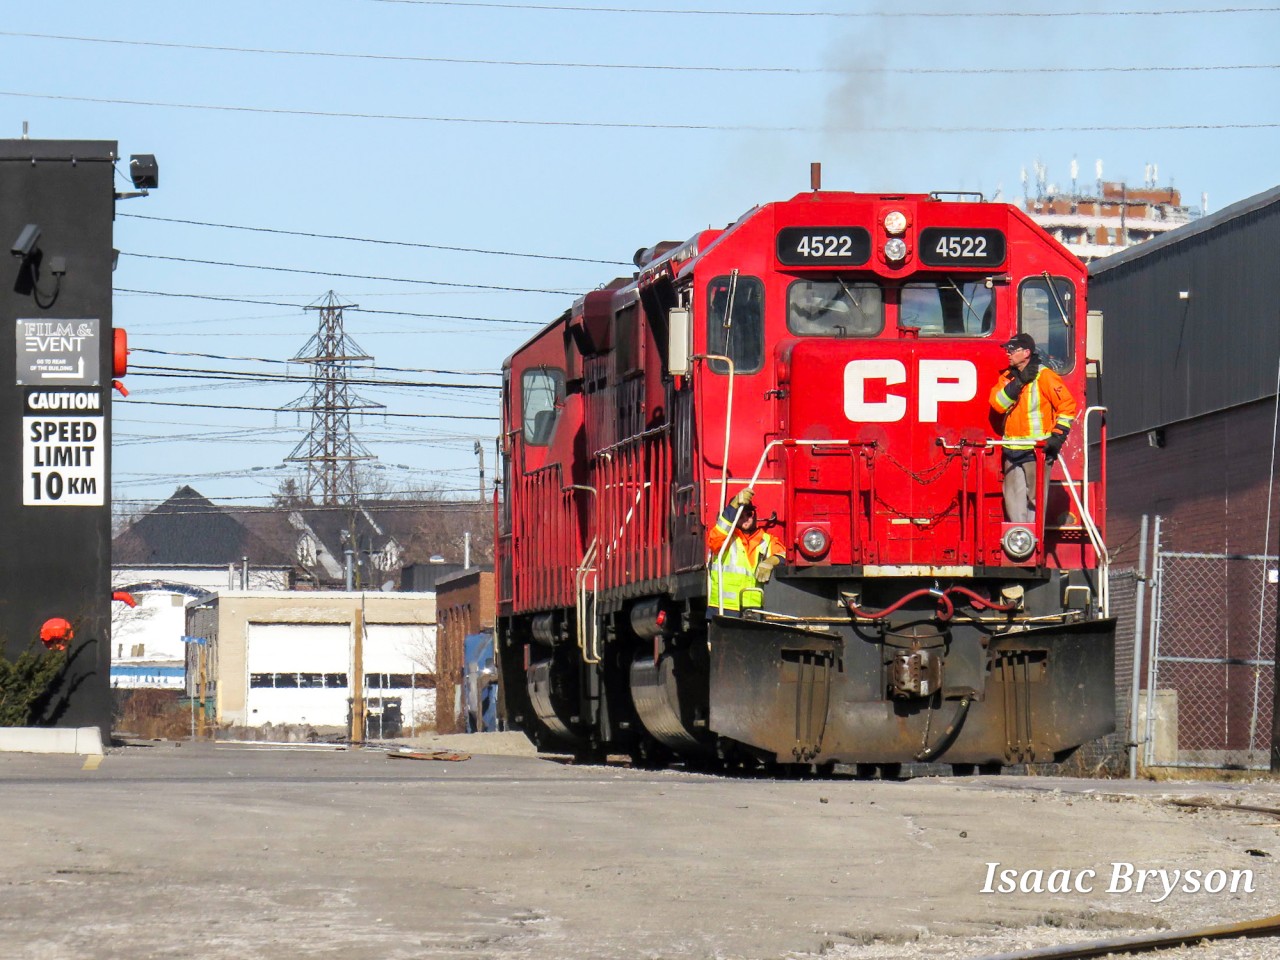 After making a lift at Versapet on the Canpa sub, CP T17 made its way to Area H and after leaving their cars on the siding on the Galt sub, CP T17 "reverses" down Area H with CP 4522 leading. This really cool section of Toronto railfanning doesn't see a whole lot of exposure due to this being a night move half of the time, and they regularly back down cars first in daylight. Today my friend and I got lucky with nothing to take down :). CP T17 is going to KOREX chemicals to lift 3 tankers before connecting to the rest of the train on the Galt and heading back to Lambton.